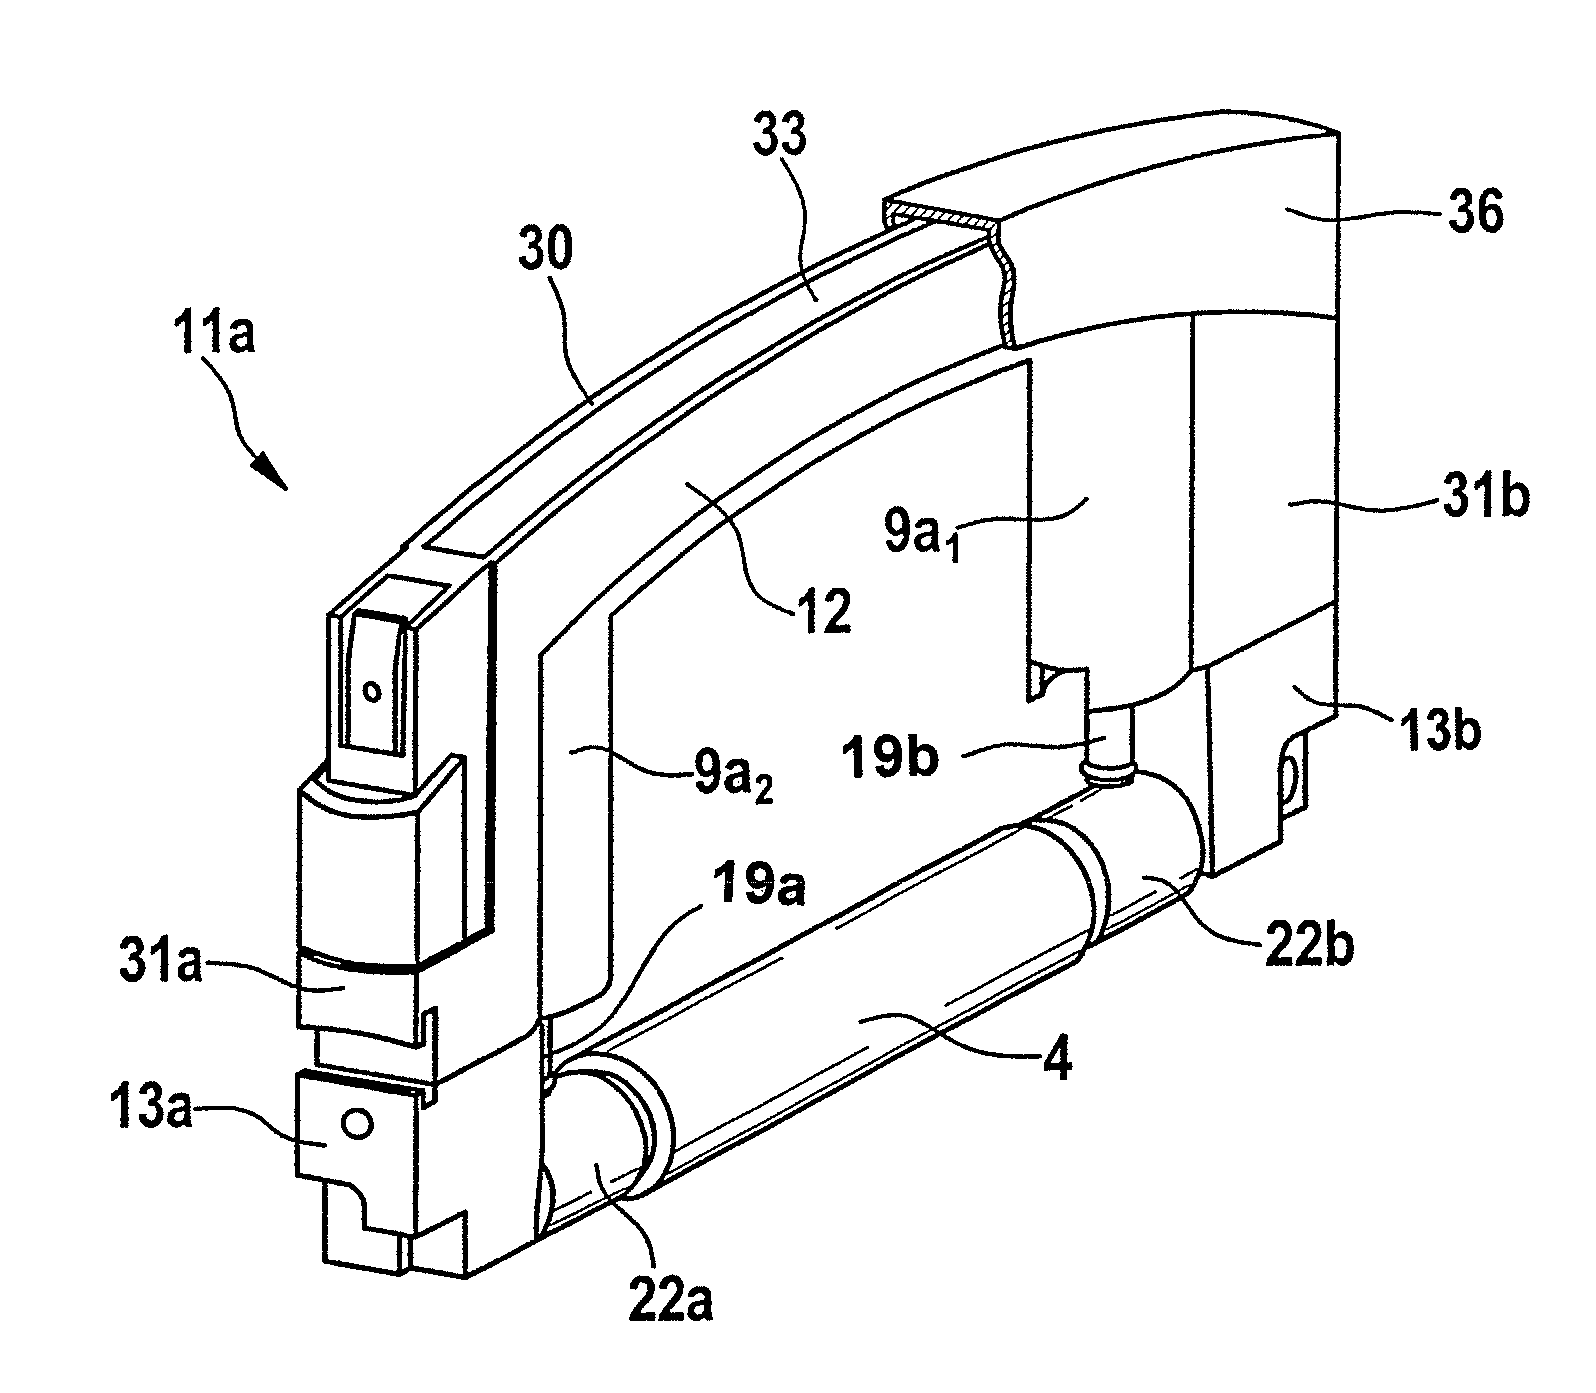 Device on a drafting system of a draw frame for textile fibre slivers